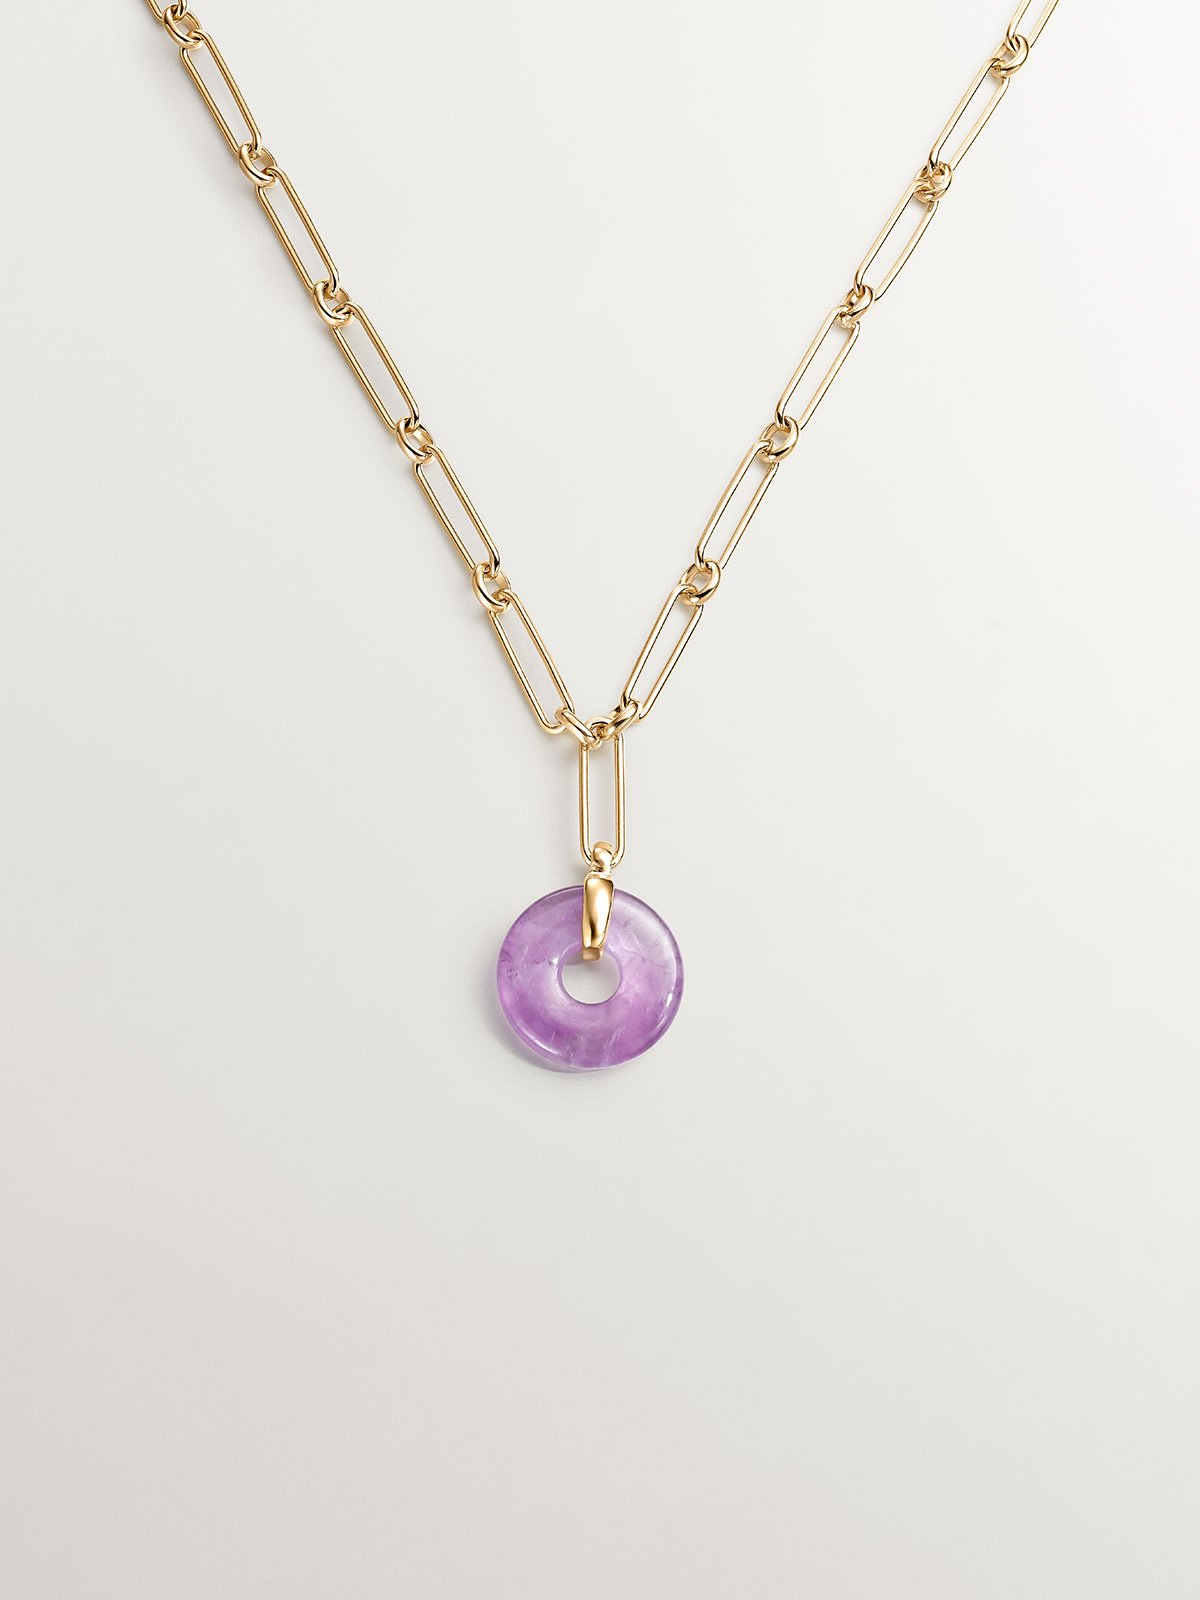 925 Silver necklace dipped in 18K yellow gold with pink amethyst